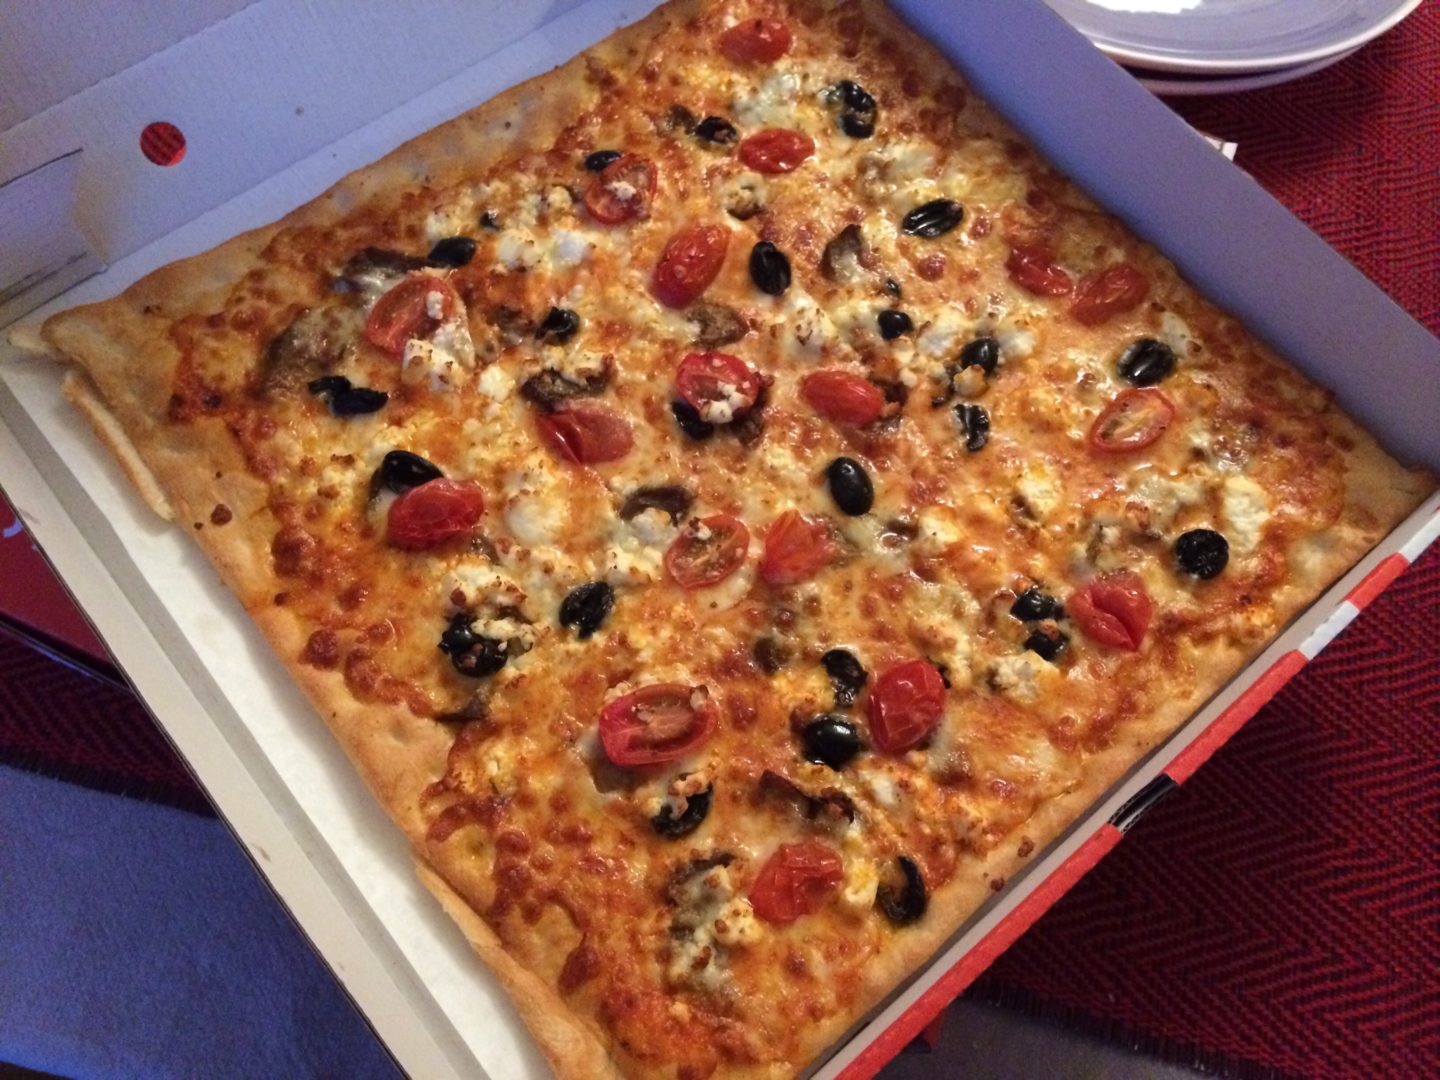 There’s always time for a pizza feat. Square Pizza #hungryhouse